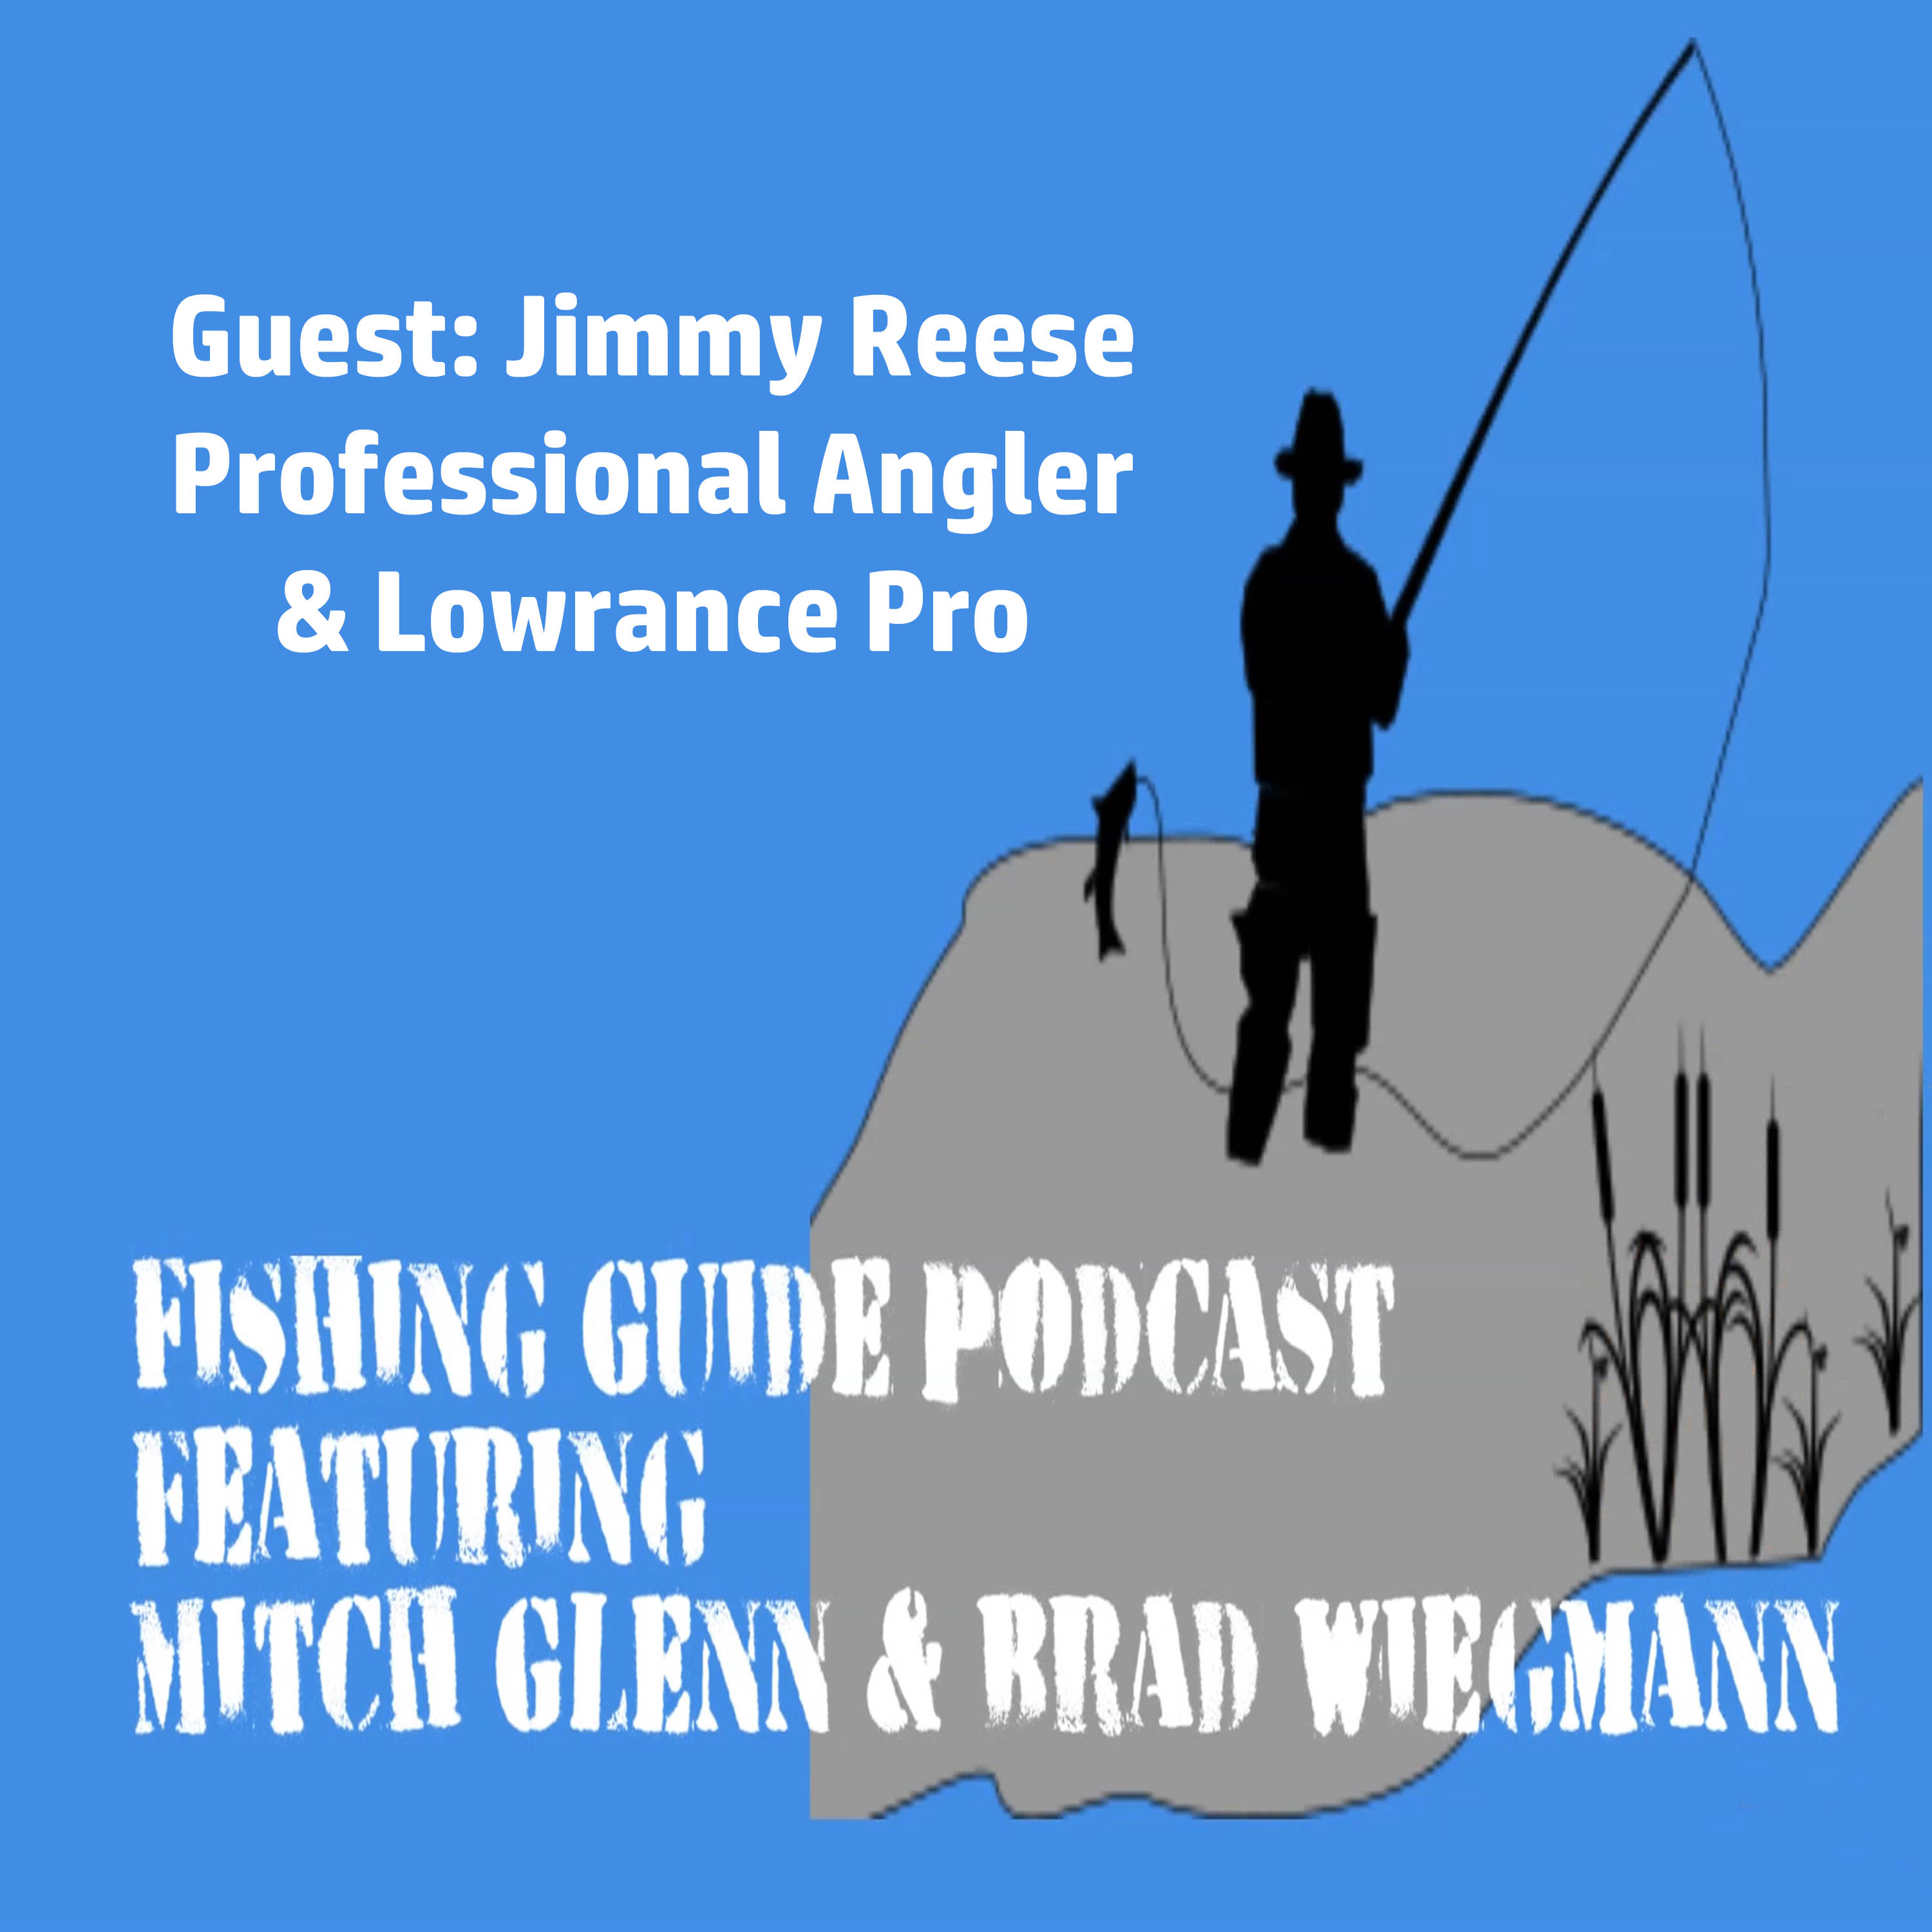 West Coast professional angler Jimmy Reese talks fishing during COVID-19 pandemic and rigging his boat with Lowrance electronics: Episode 7